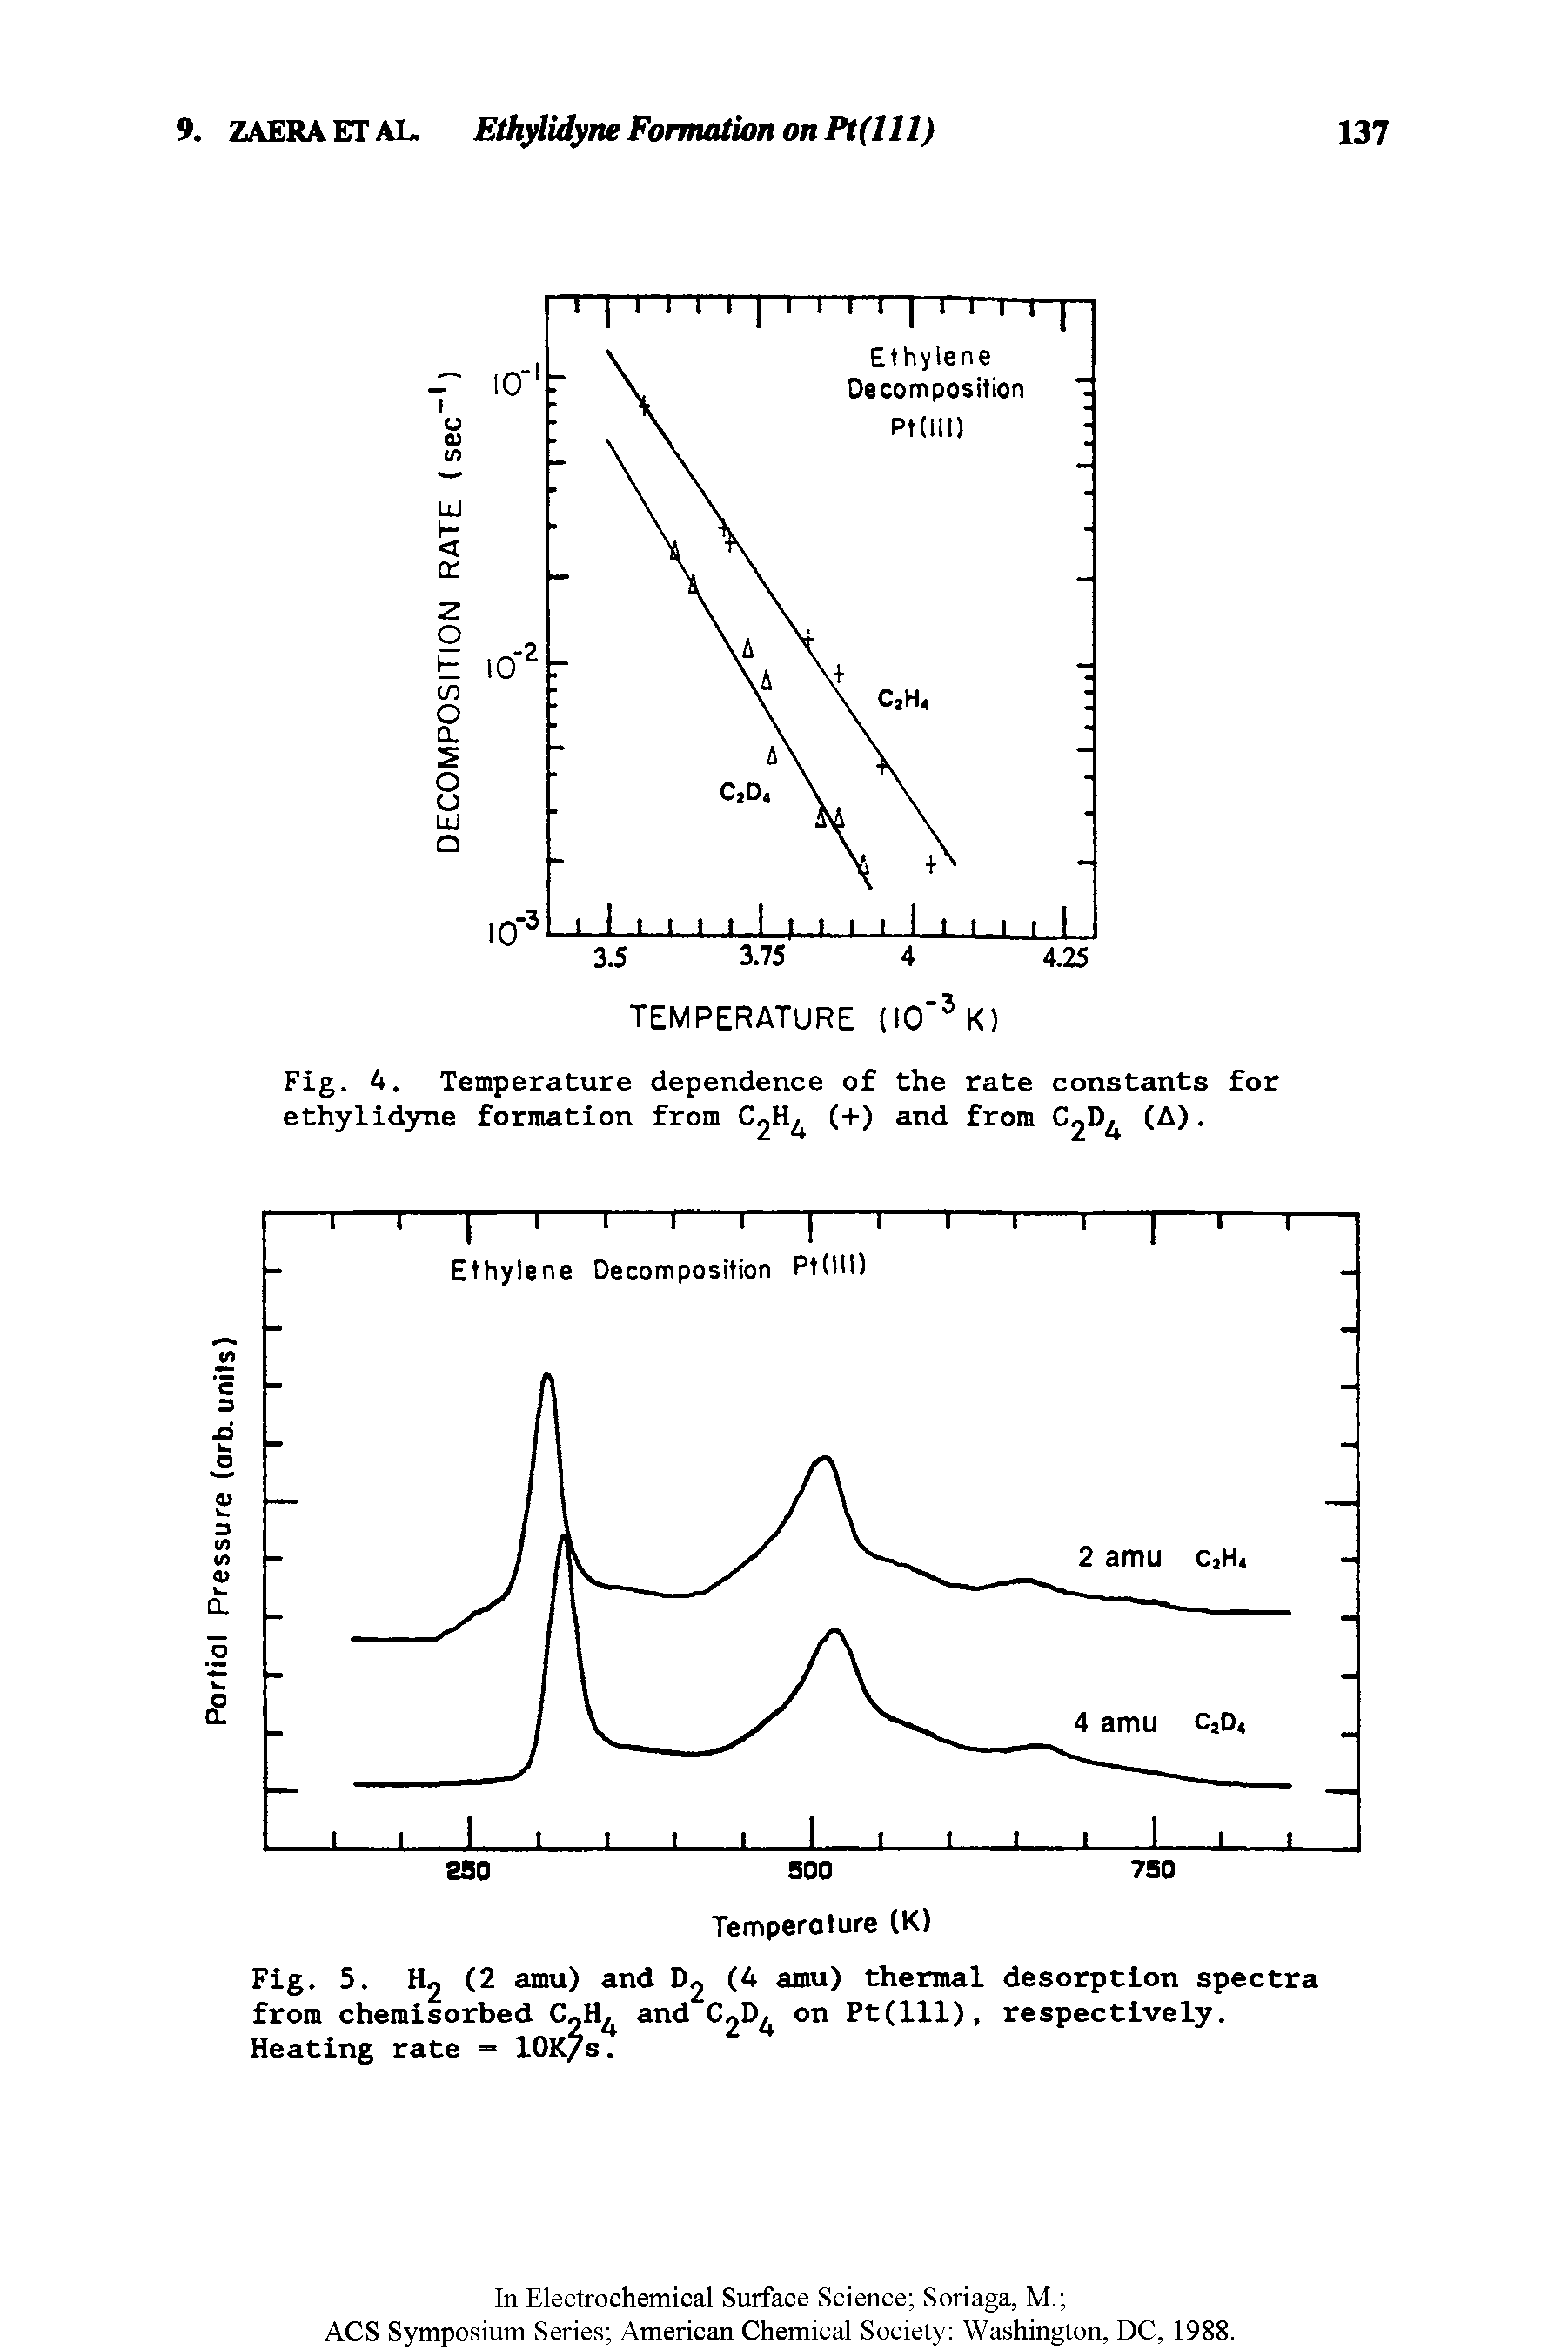 Fig. 4. Temperature dependence of the rate constants for ethylidyne formation from (+) and from 02 (A).